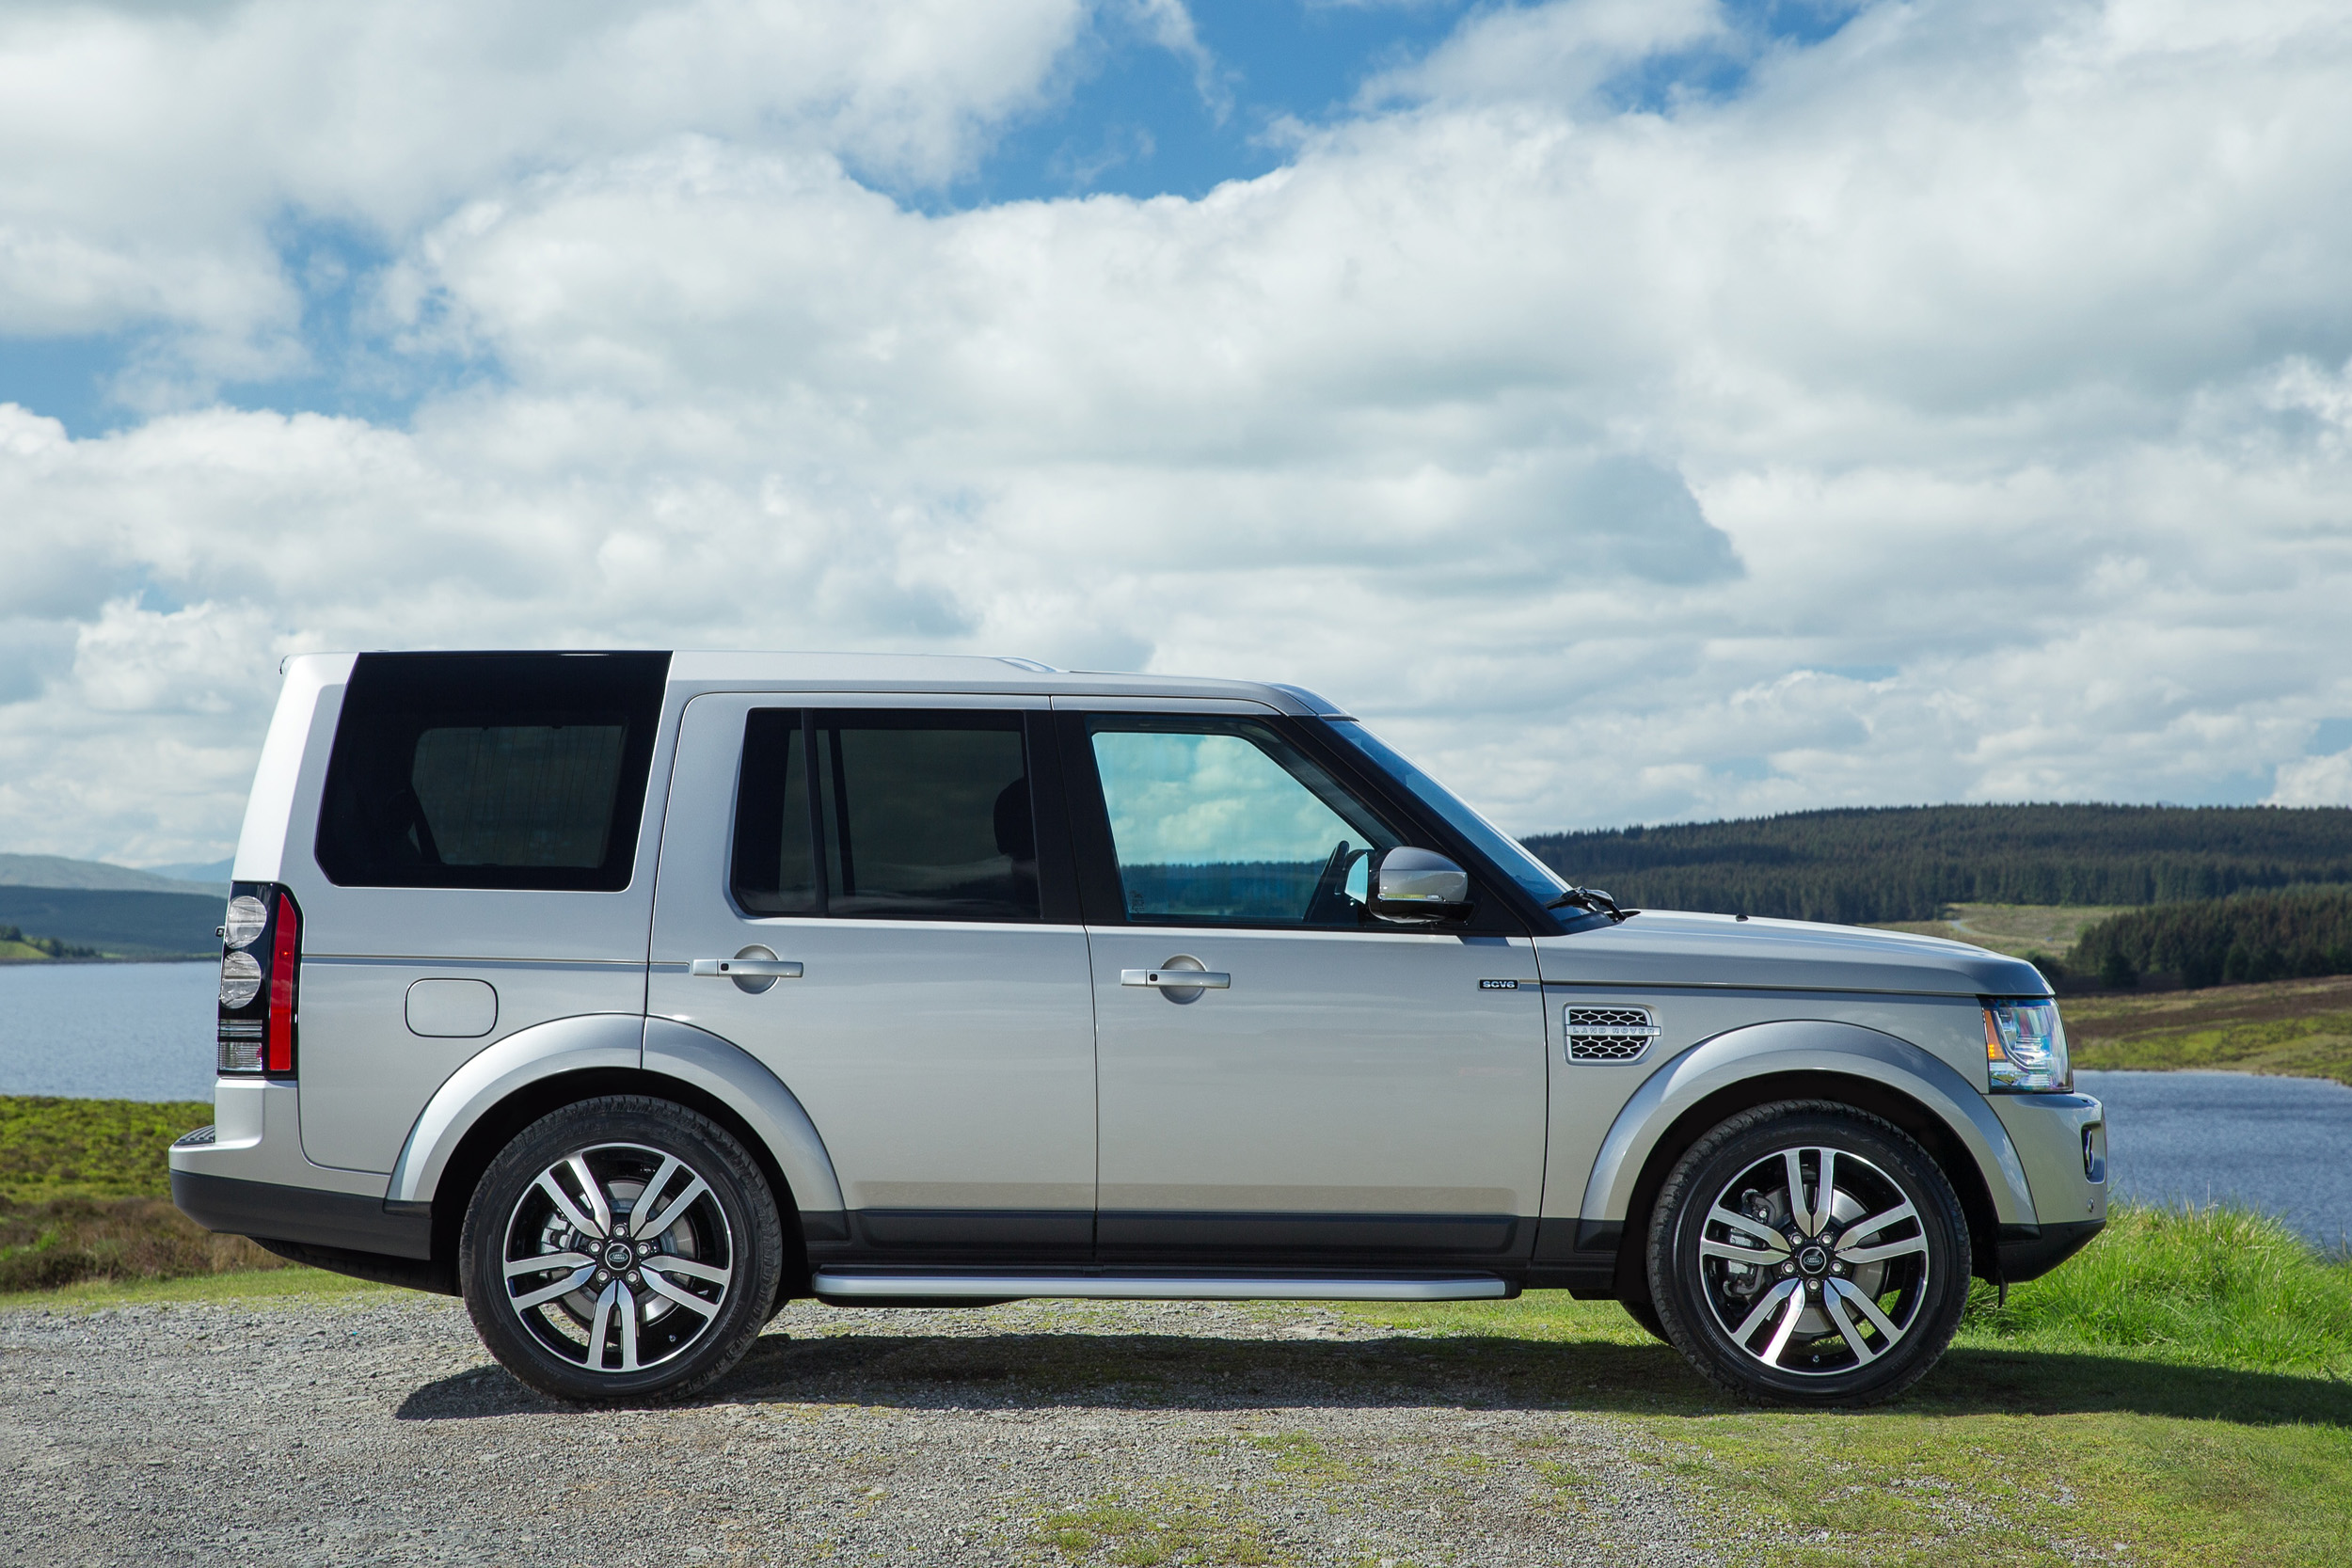 Дискавери 0. Land Rover Discovery 4. Ленд Ровер Дискавери 4 2015. Лэнд Ровер Дискавери, 2015. Land Rover Discovery lr4.